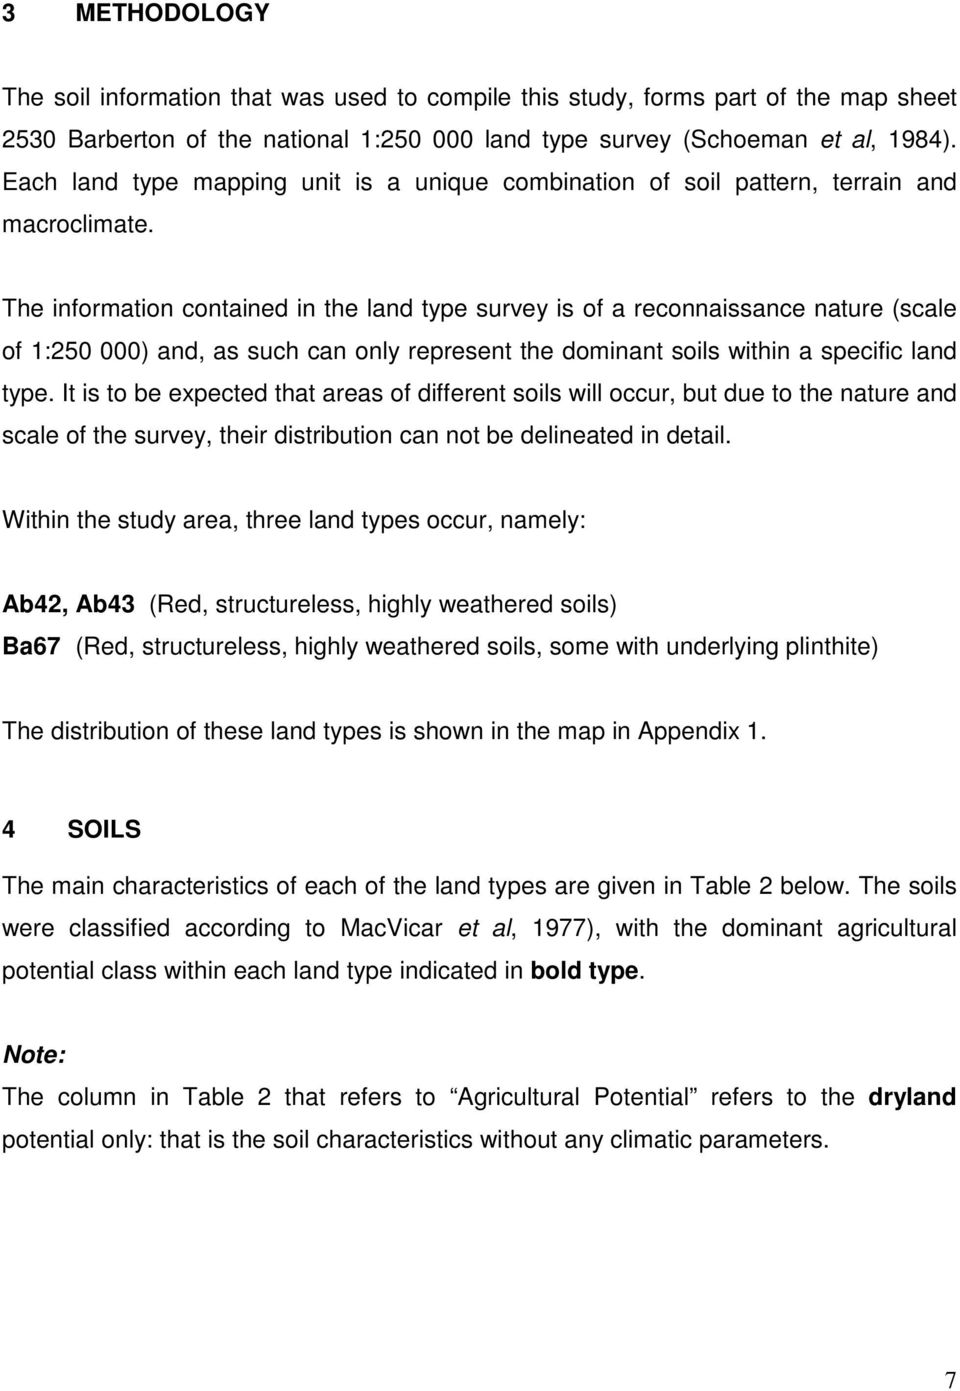 The information contained in the land type survey is of a reconnaissance nature (scale of 1:250 000) and, as such can only represent the dominant soils within a specific land type.